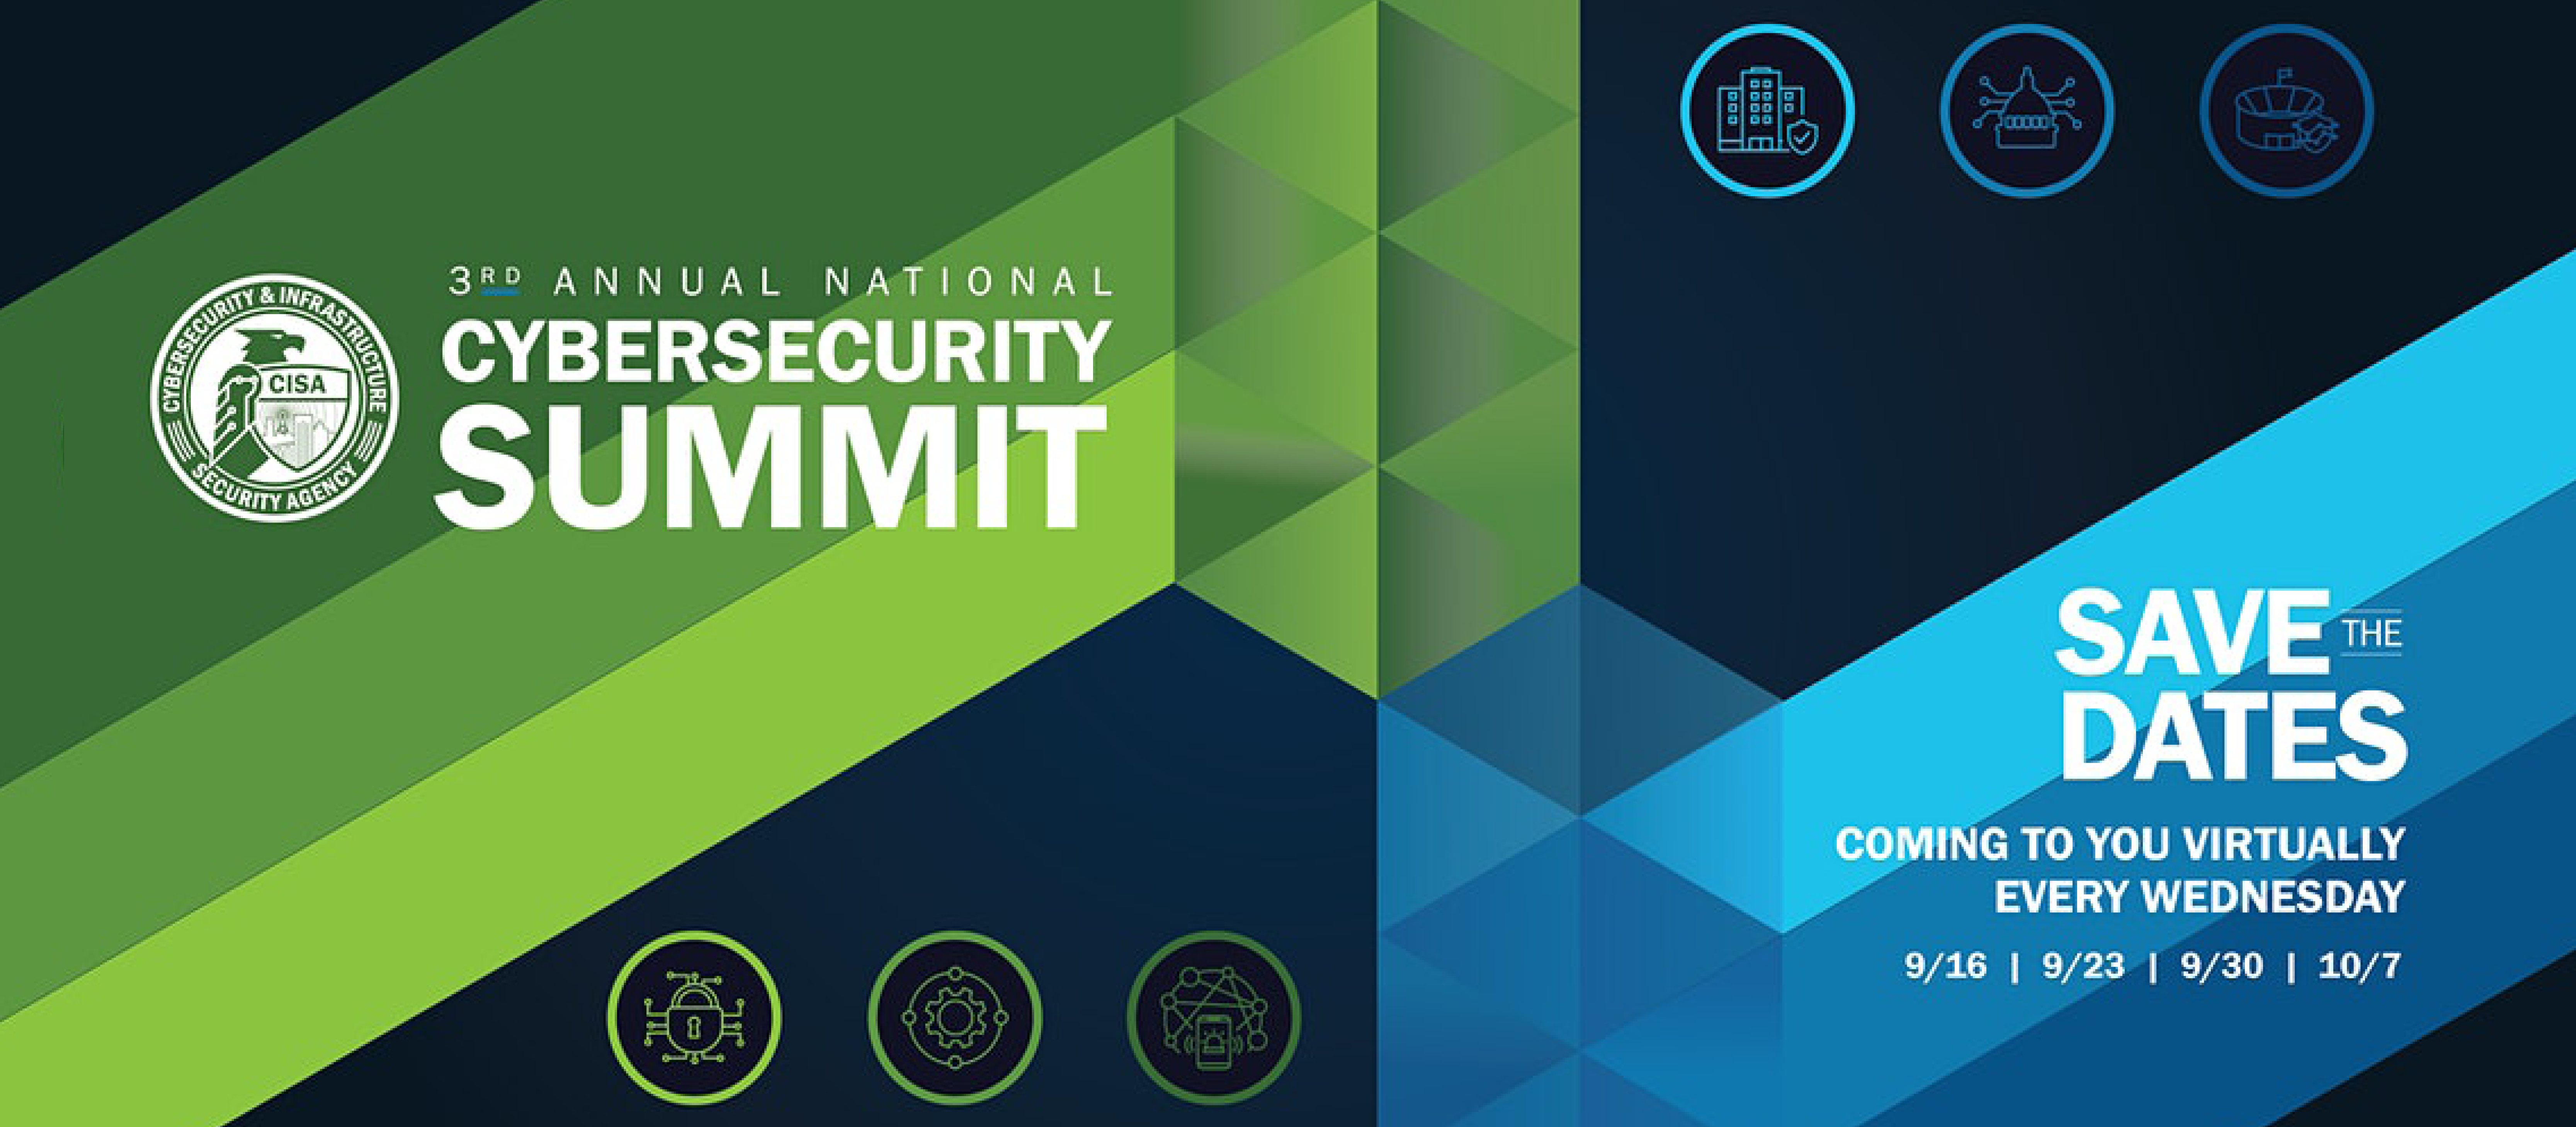 3rd Annual National Cybersecurity Summit Leading the Digital